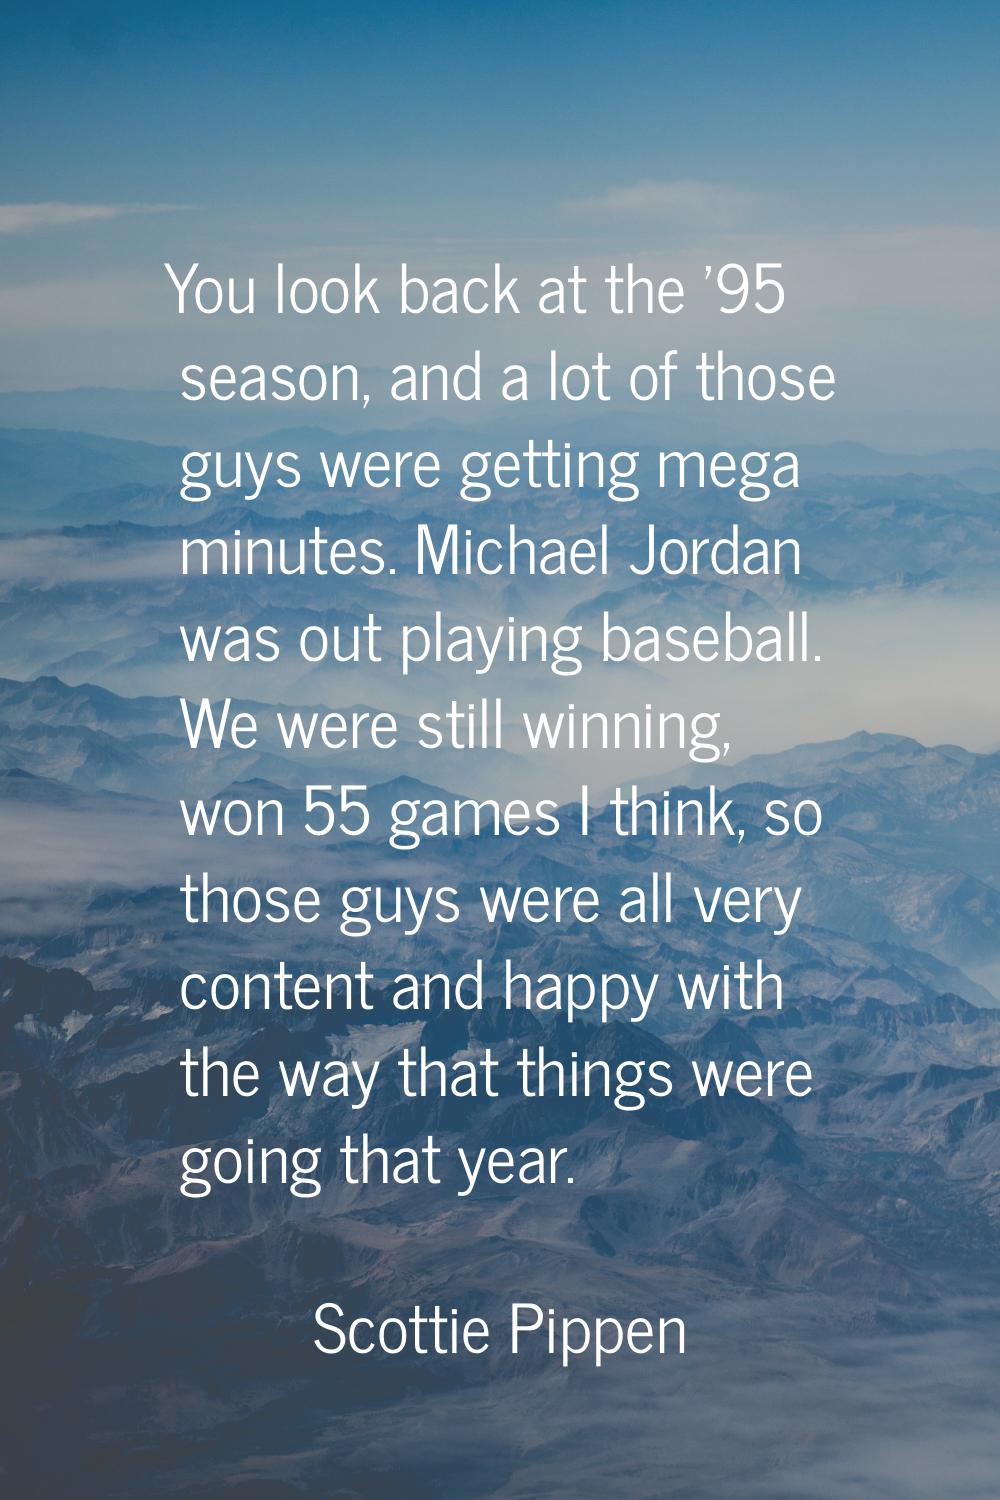 You look back at the '95 season, and a lot of those guys were getting mega minutes. Michael Jordan 